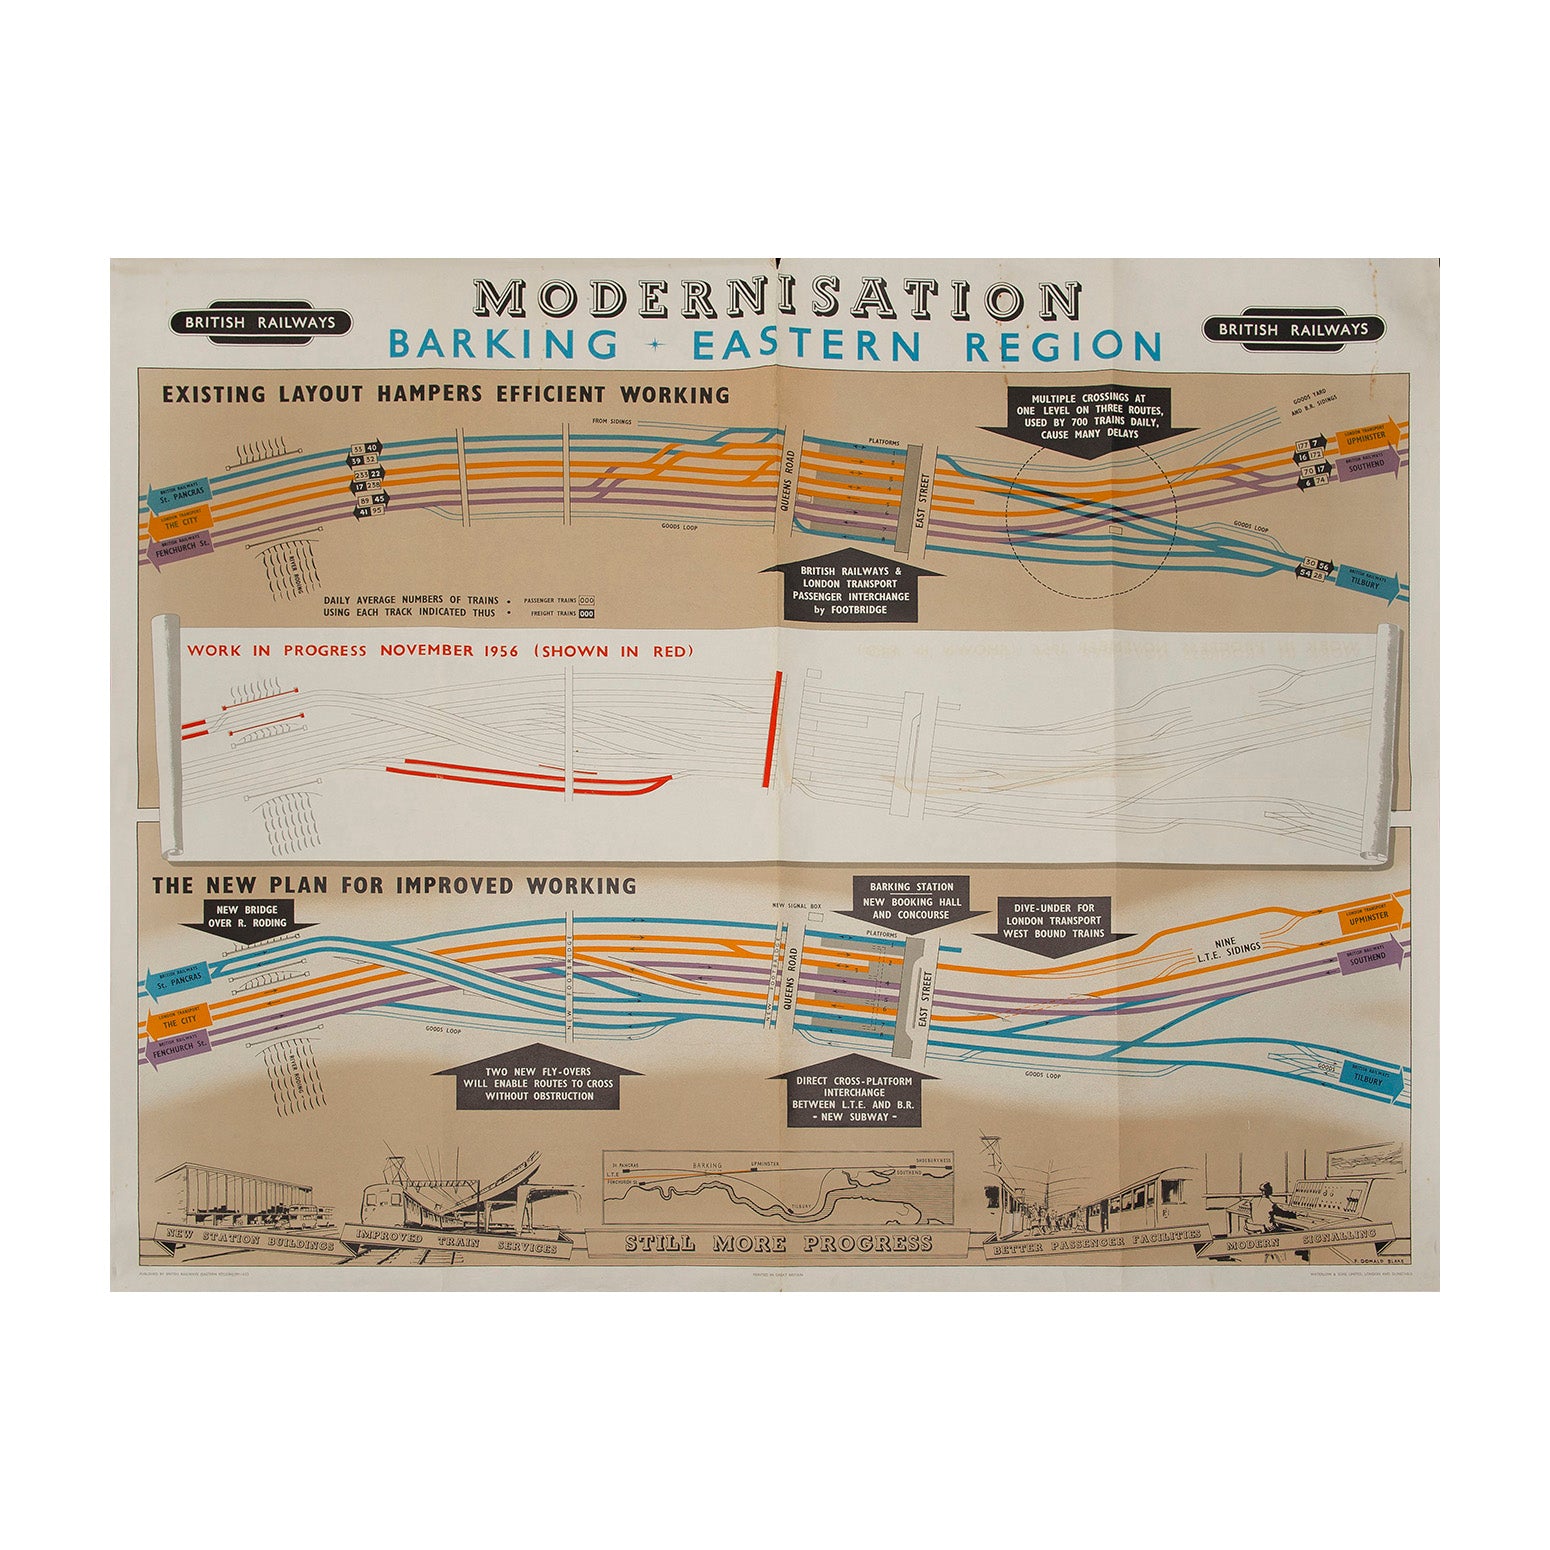 Original British Railways poster modernisation of Barking interchange station. Diagram of improved track layouts, with illustrations at the base by Donald Blake showing enhanced passenger facilities and signalling